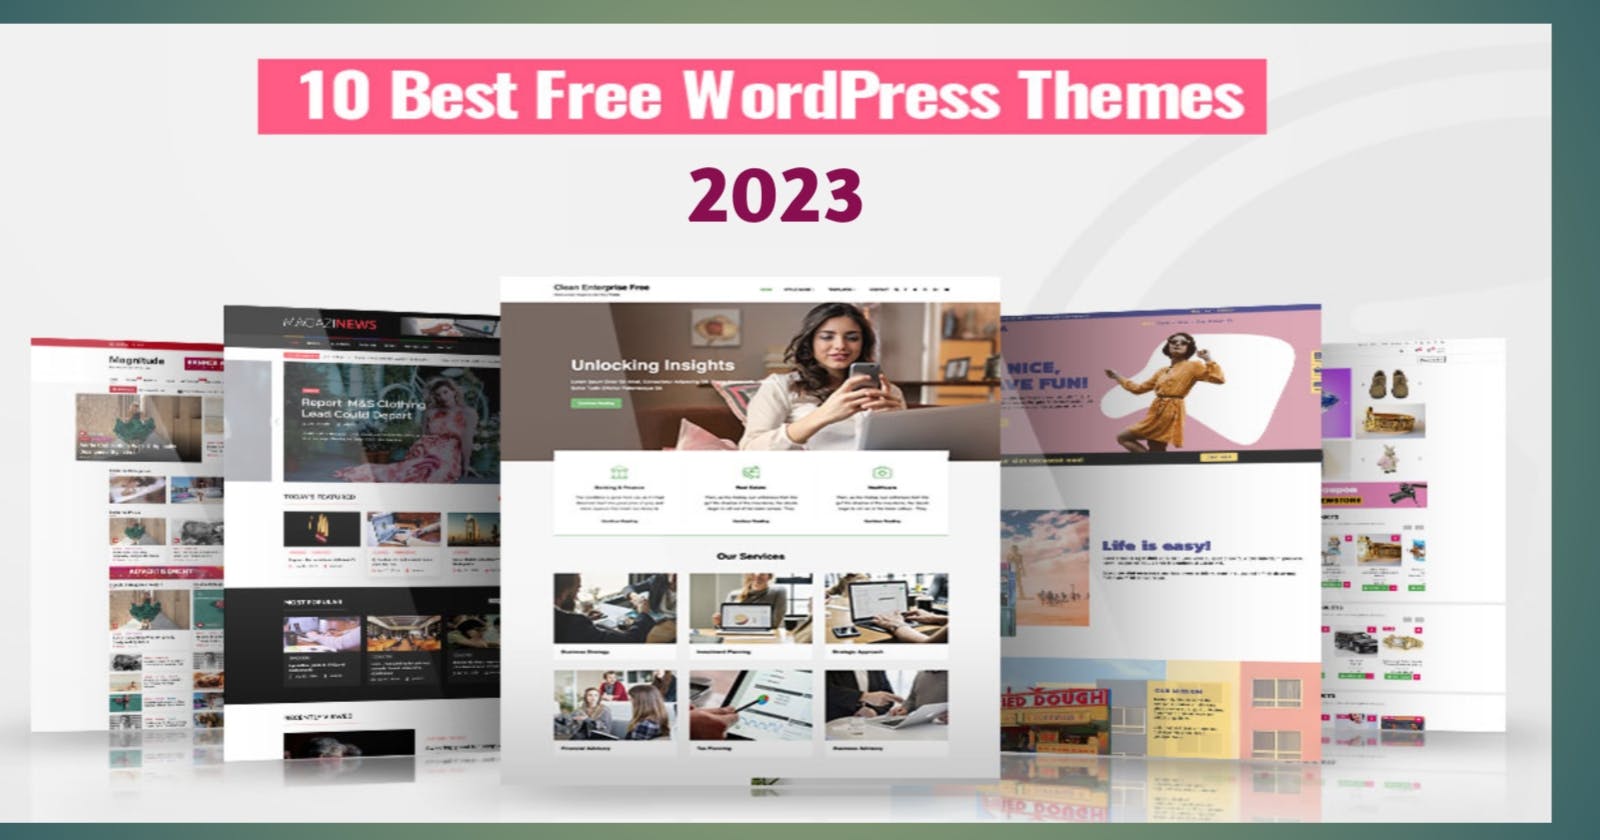 Transform Your Website With These 10 Multipurpose WordPress Themes for 2023